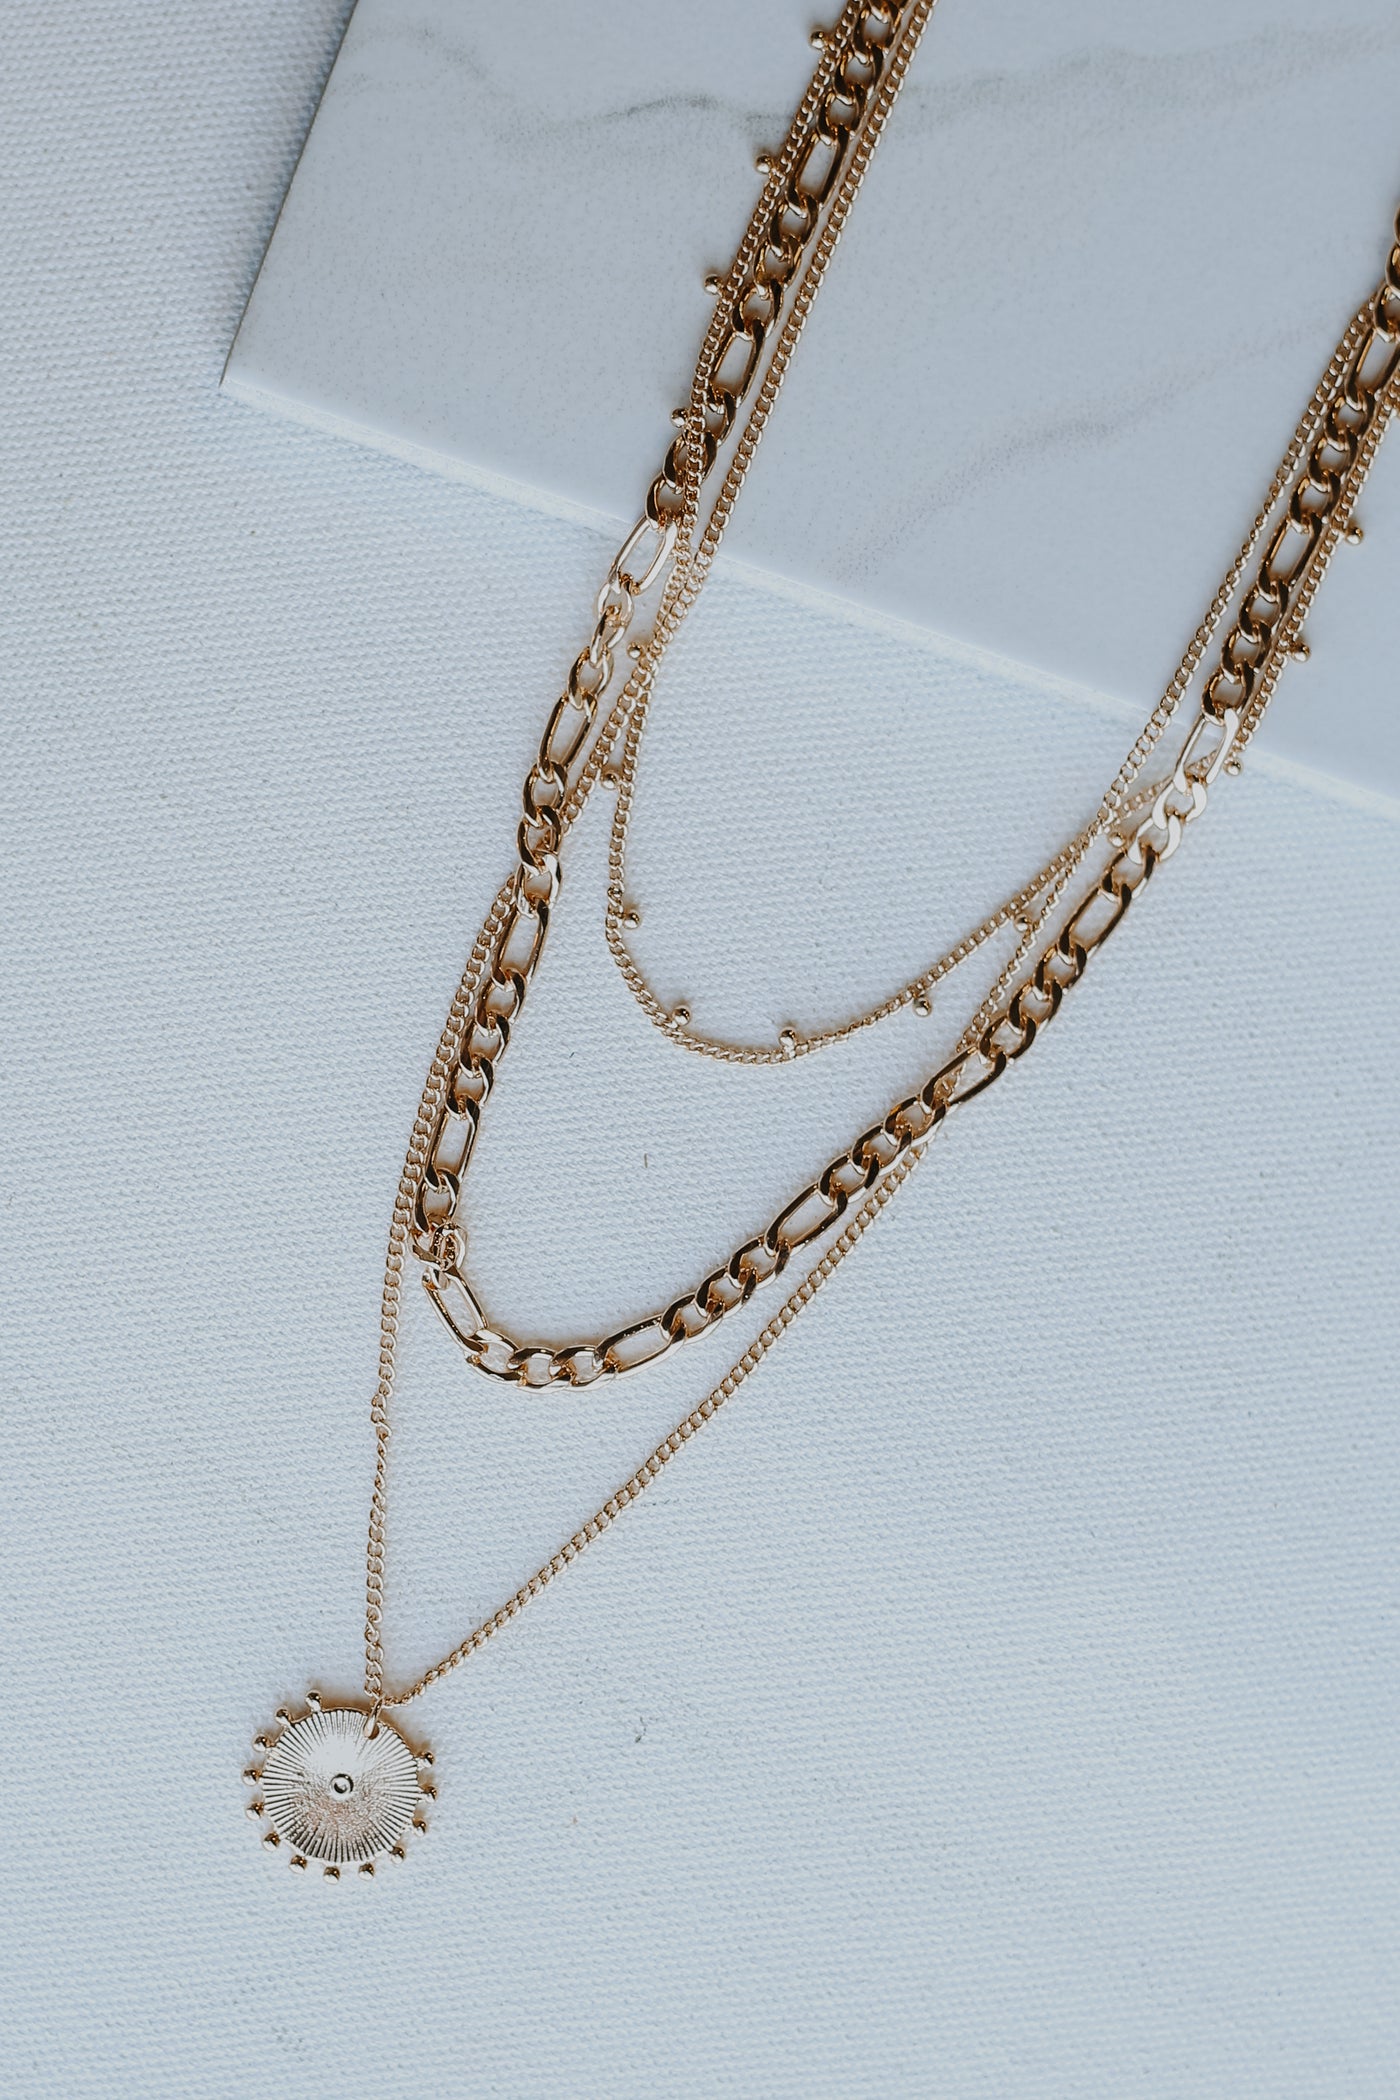 Gold Layered Necklace from dress up